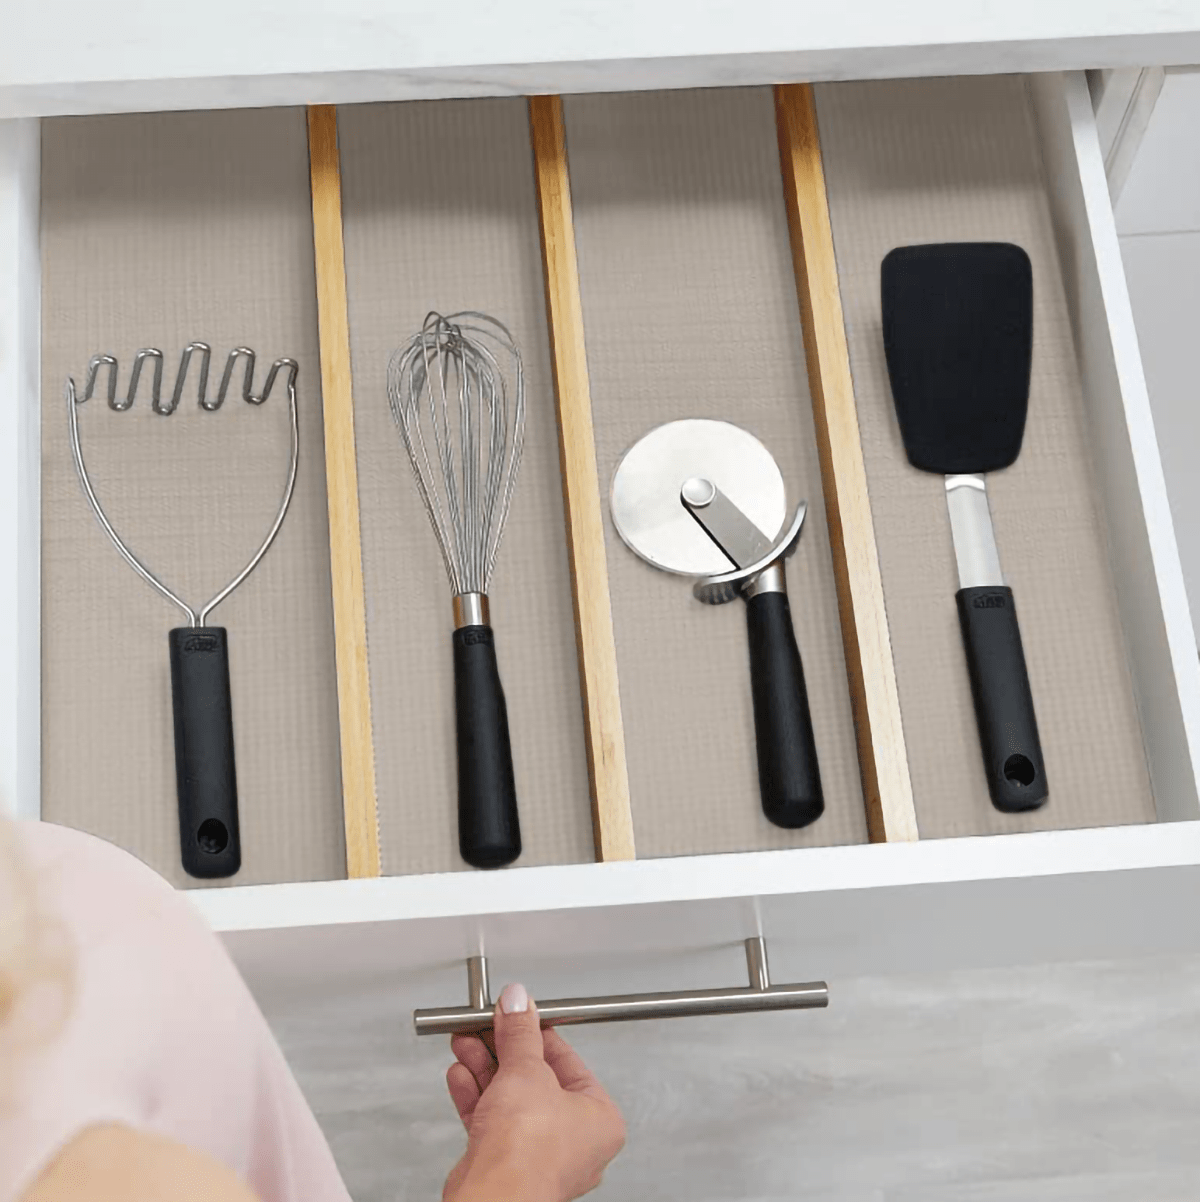 11 Best Shelf Liners To Protect Your Cabinets, Reviewed For 2023